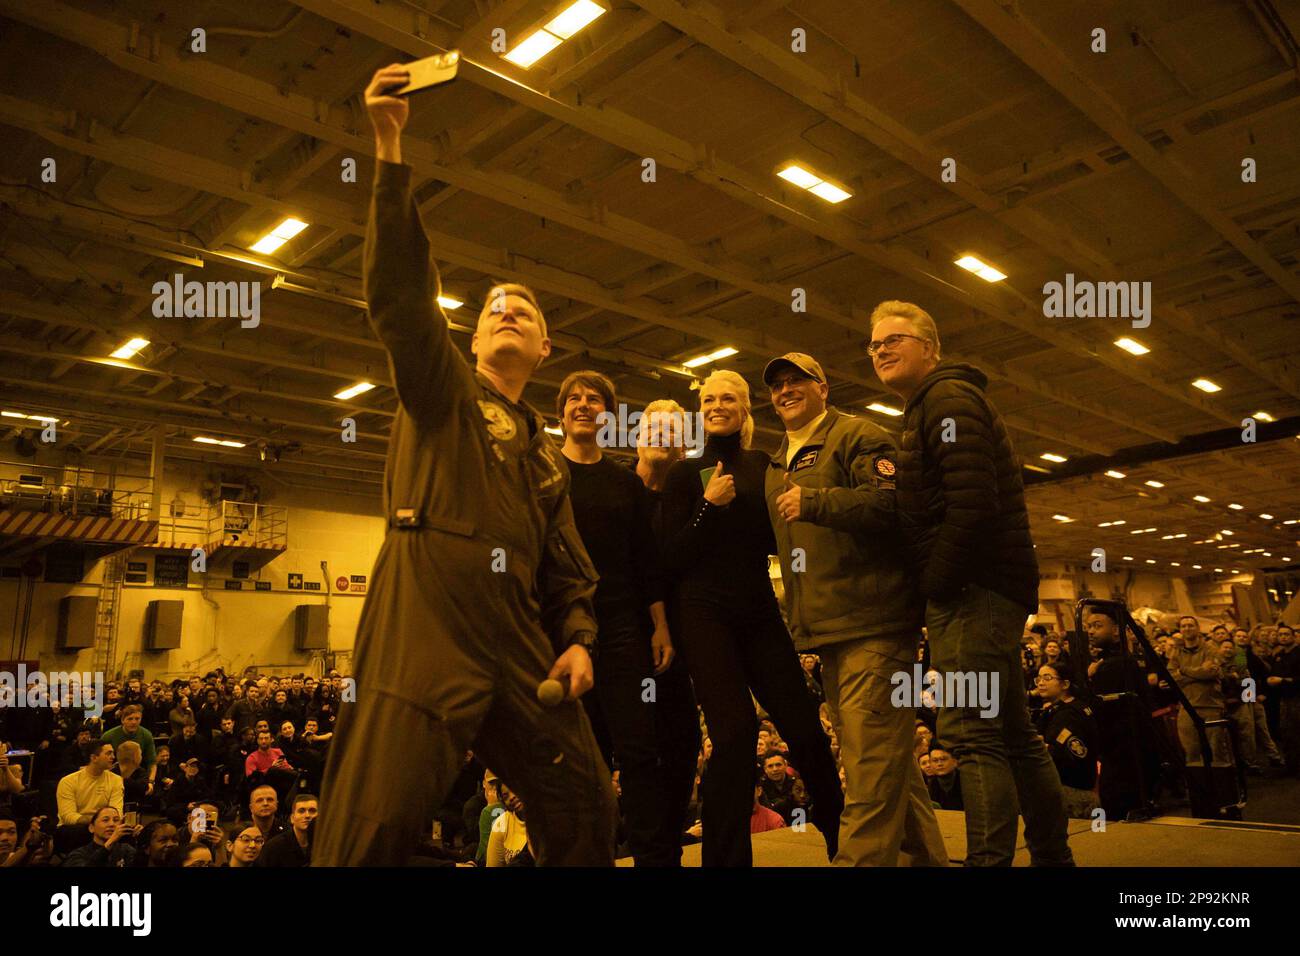 Capt. Dave Pollard, commanding officer aboard the Nimitz-class aircraft carrier USS George H.W. Bush (CVN 77), takes an on-stage selfie with Tom Cruise, right, Christopher McQuarrie, center right, Hannah Waddingham, center, Eddie Hamilton, left center, Rear Adm. Dennis Velez, commander Carrier Strike Group (CSG) 10 and the George H.W. Bush CSG, and Sailors during a visit to the ship, on March 2, 2023, while filming scenes for 'Mission: Impossible - Dead Reckoning Part Two.' The George H.W. Bush Carrier Strike Group is on a scheduled deployment in the U.S. Naval Forces Europe area of operations Stock Photo